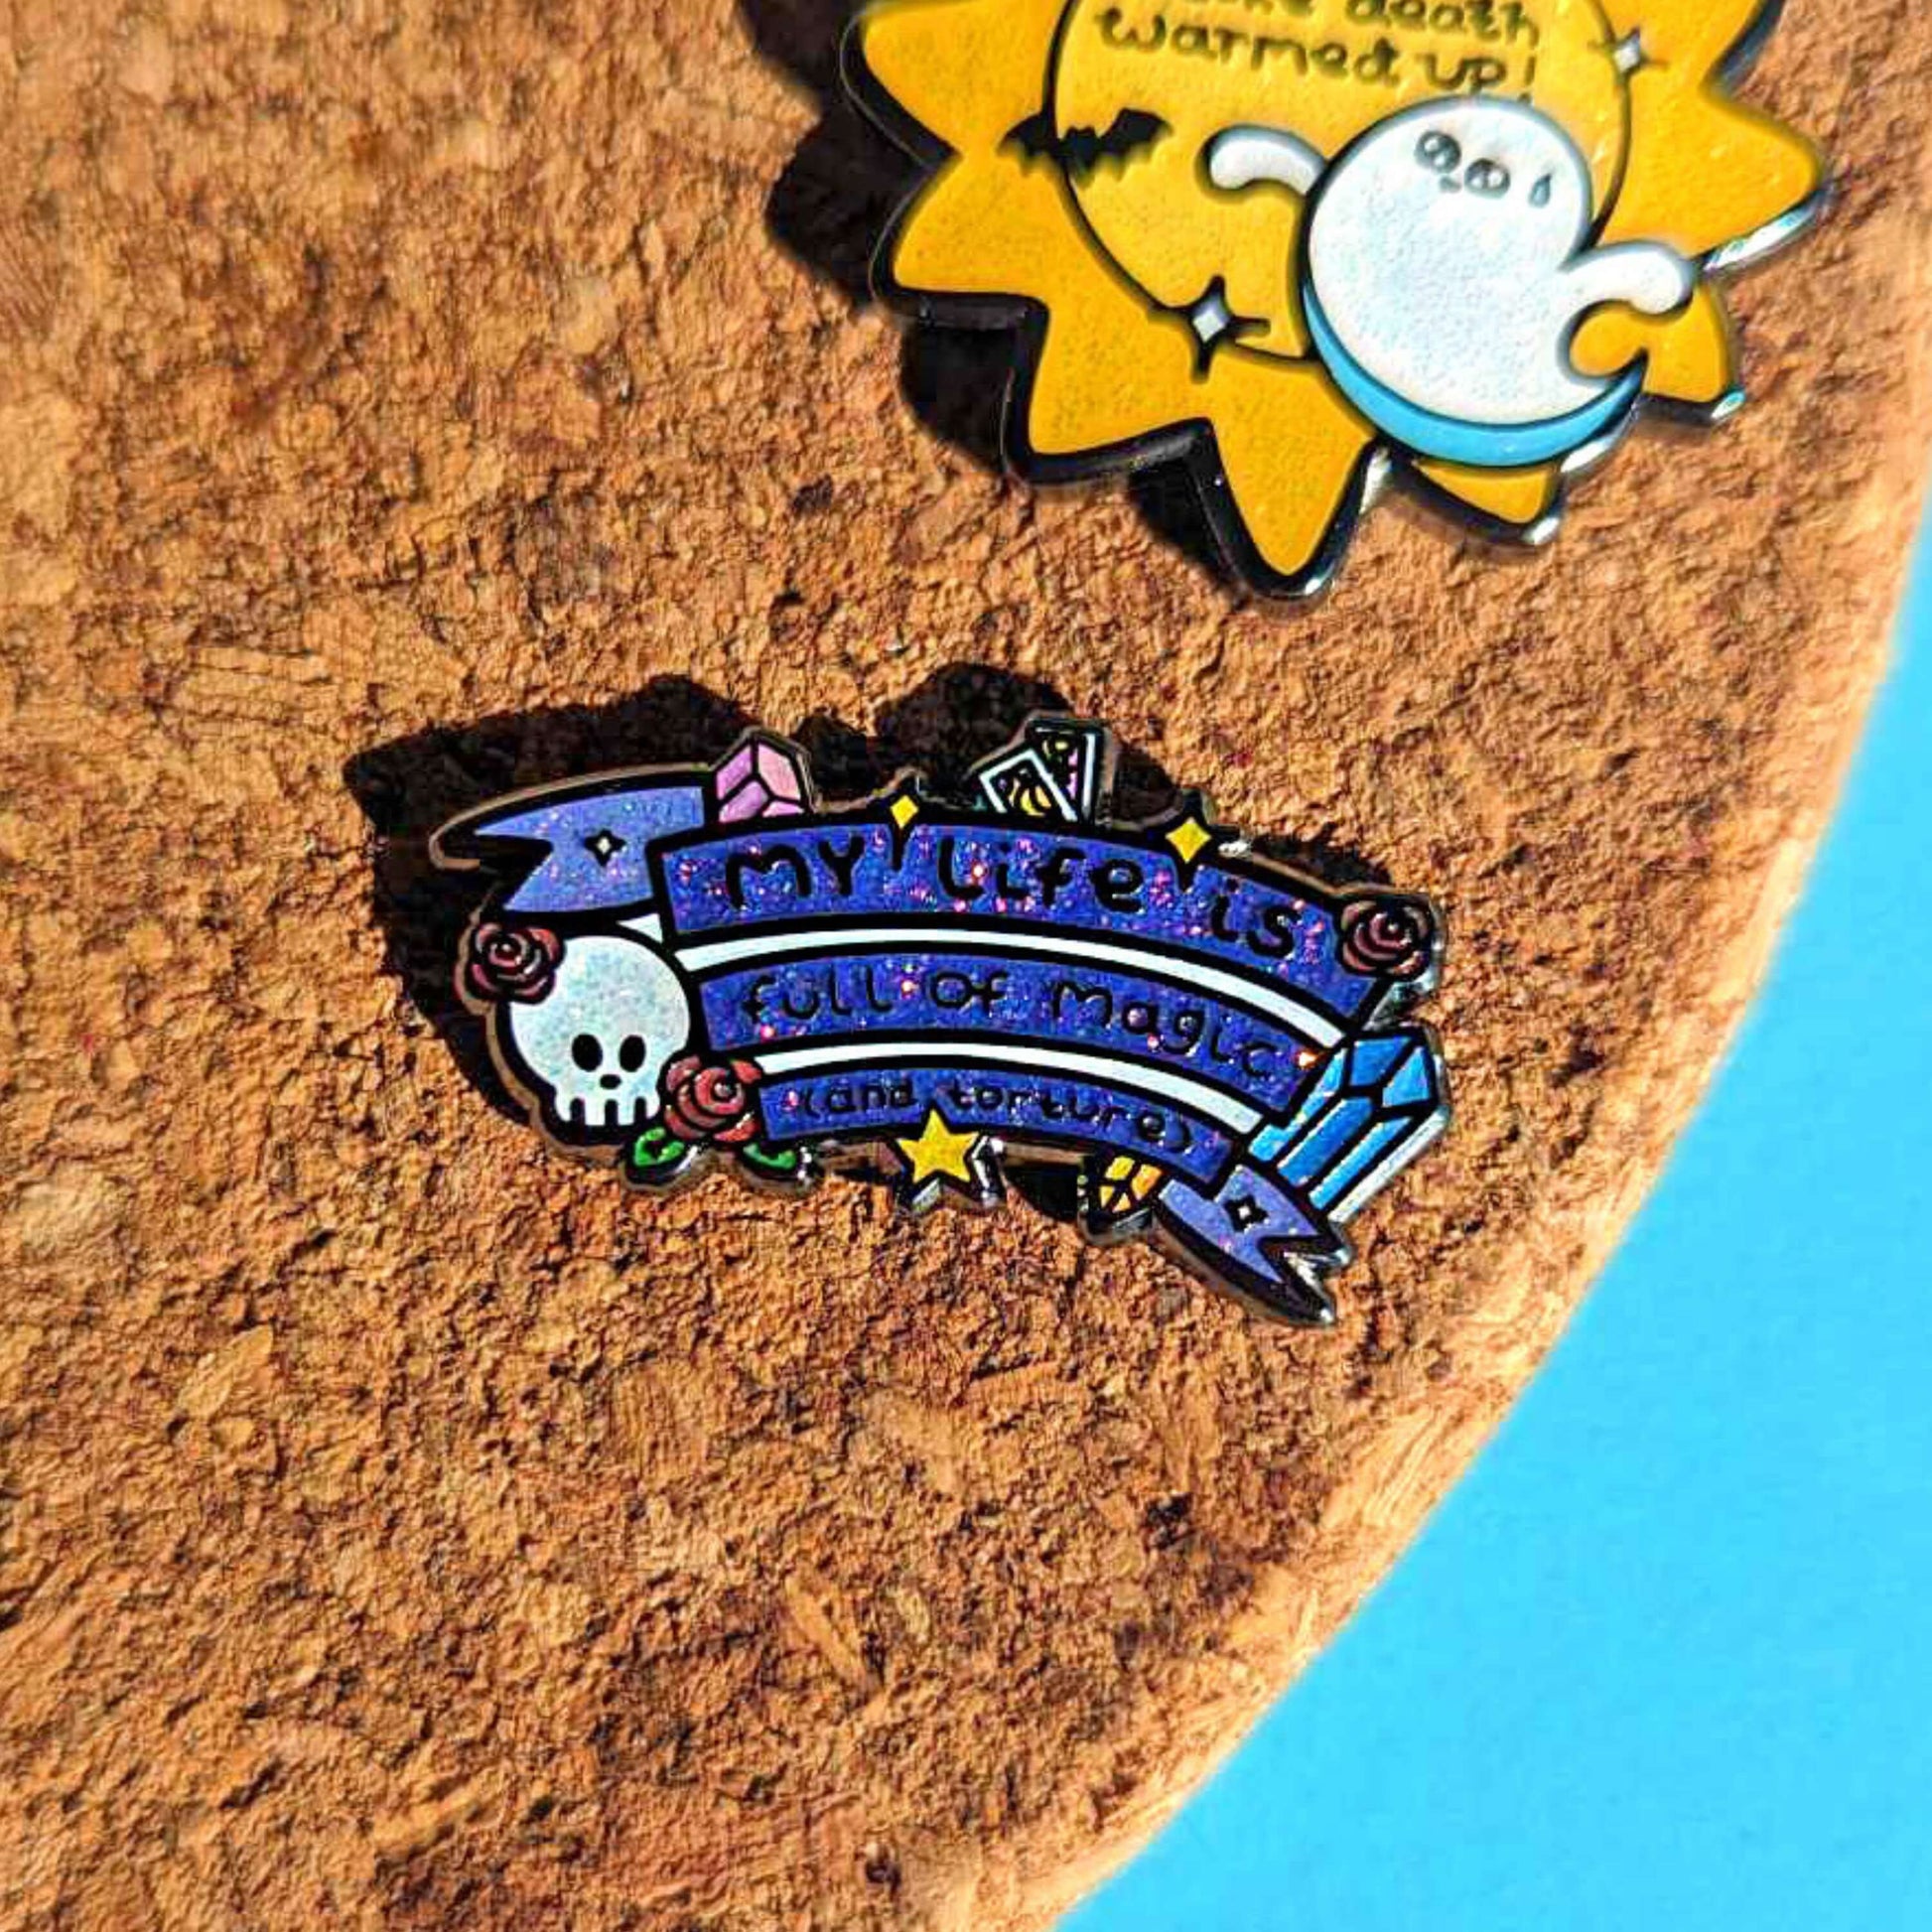 The My Life is Full of Magic & Torture Glitter Enamel Pin pinned onto a cork pin board with other innabox pins. The glittery finish enamel pin badge features a purple banner sash of black text reading 'my life is full of magic (and torture)' with yellow sparkles, crystals, red roses, tarot cards and a skull head.